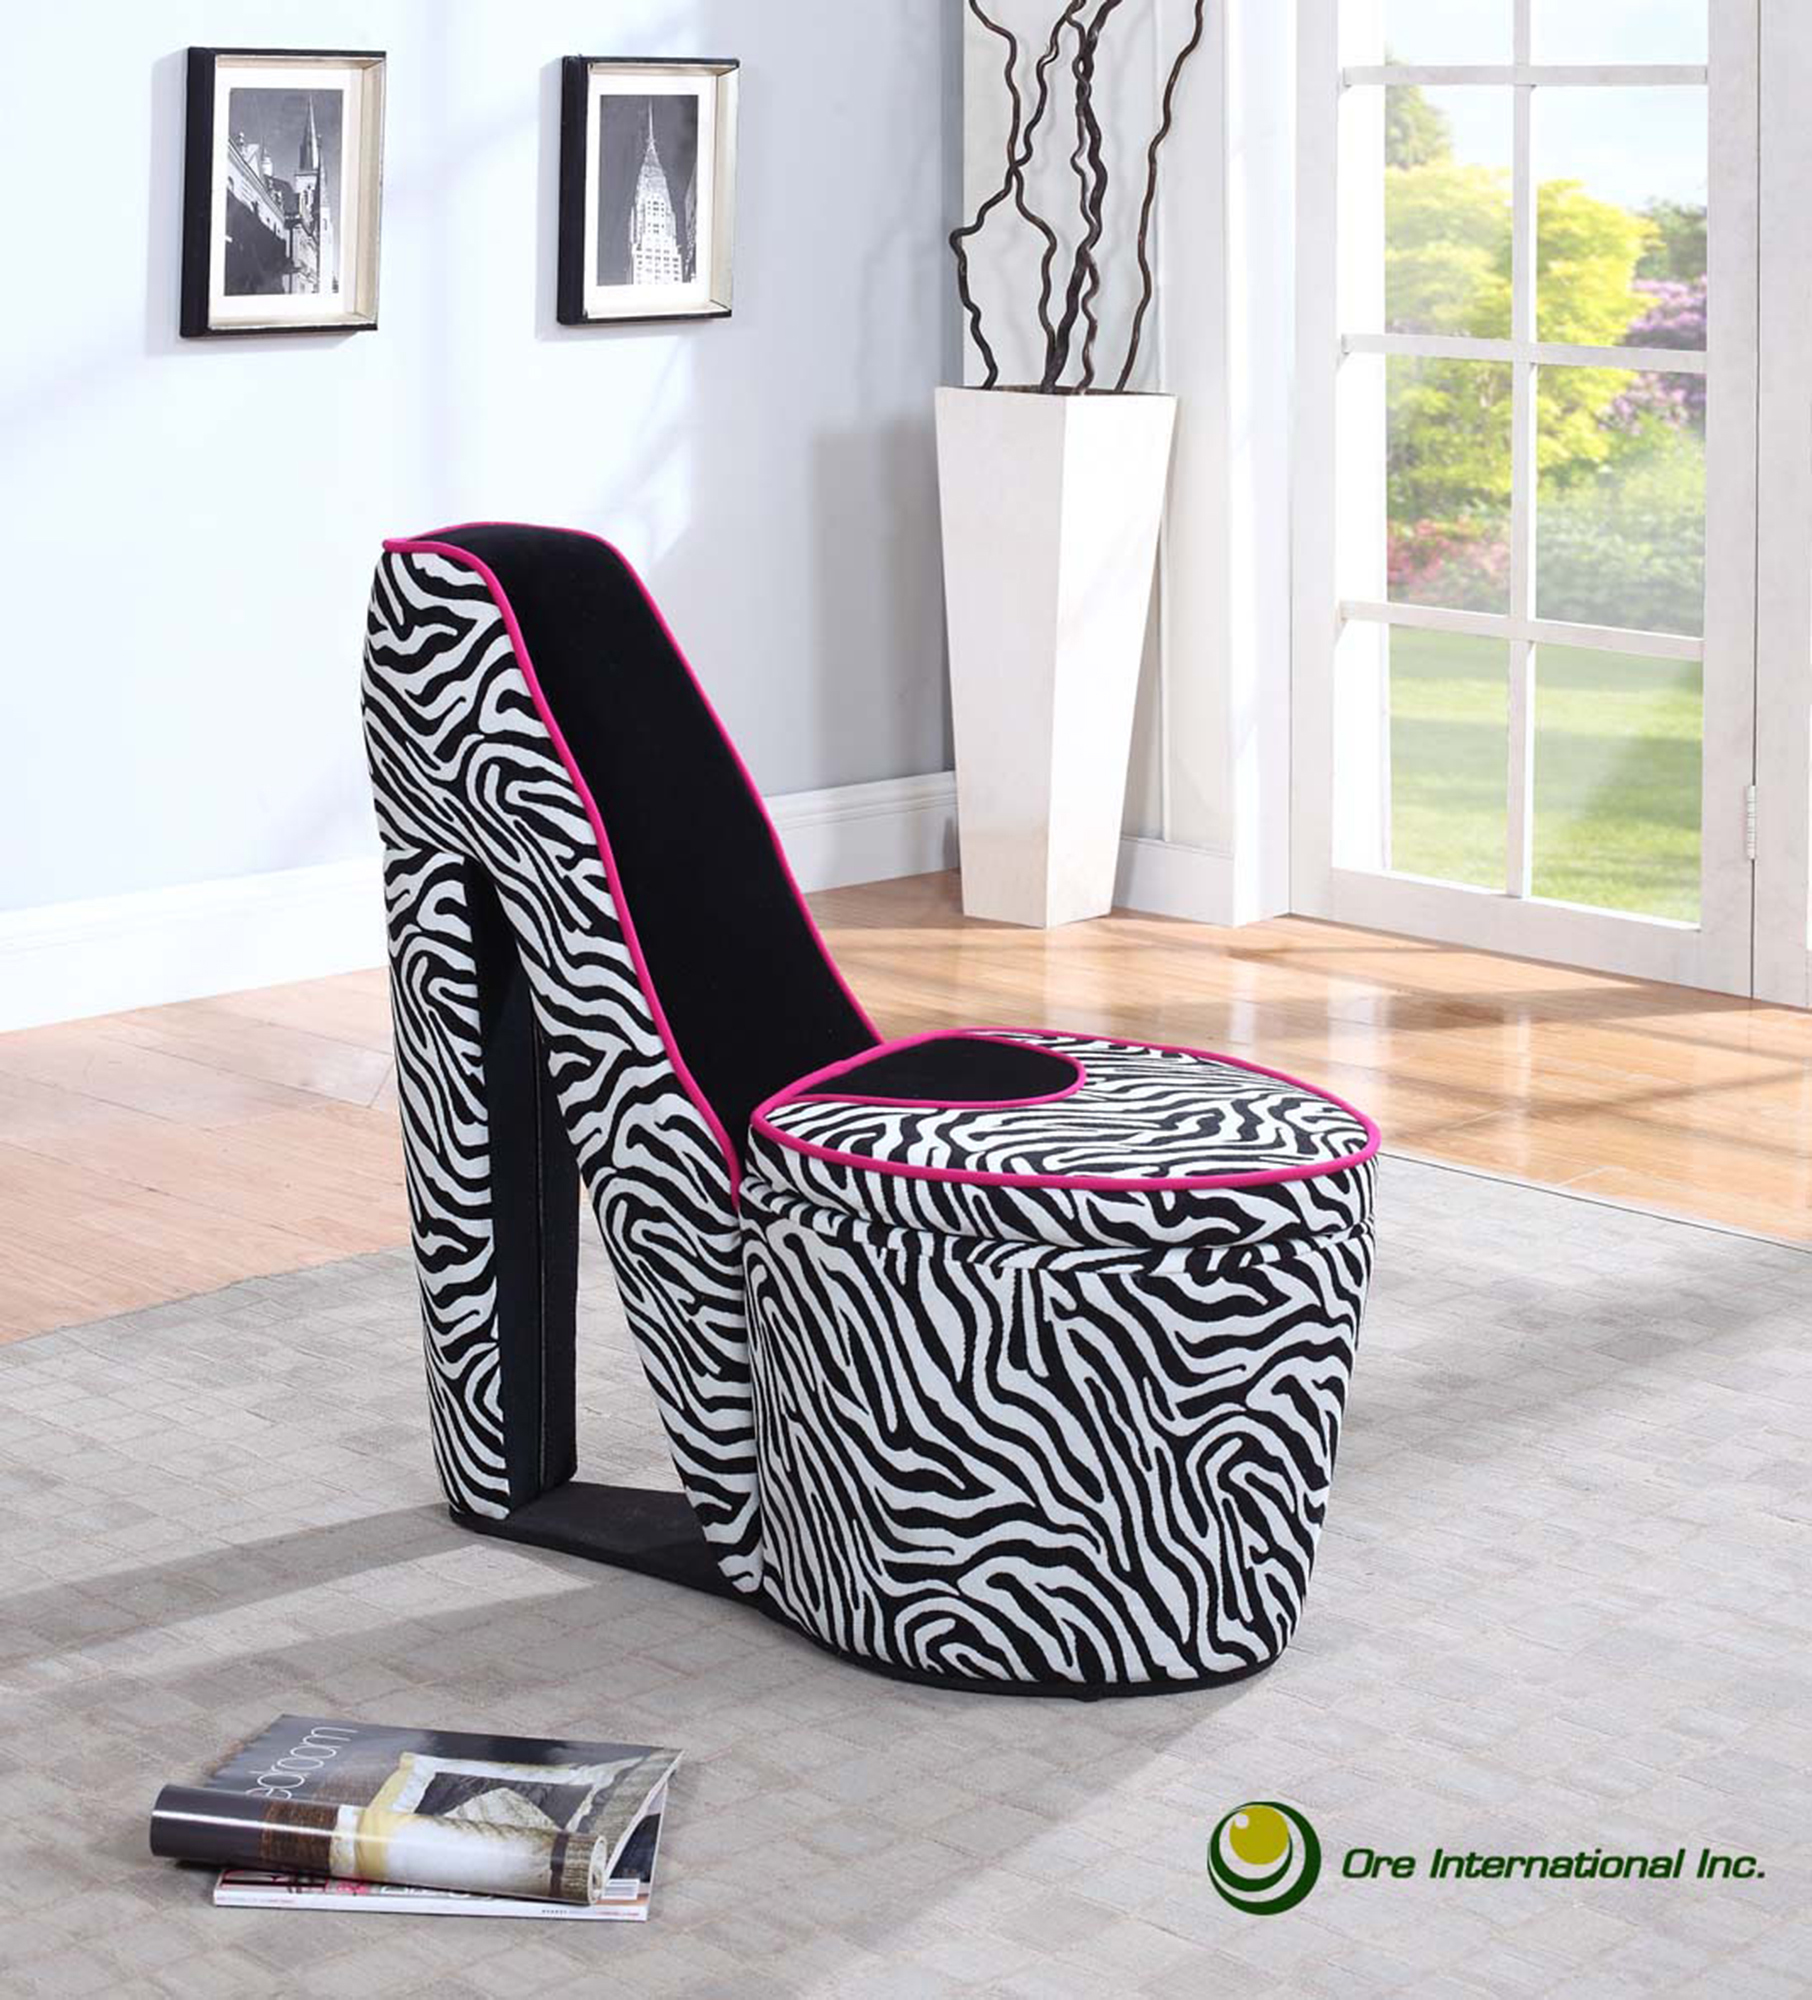 Shoe Chair & Lace Throw Pillow | Custom Upholstered Chairs |  WickedElements.com